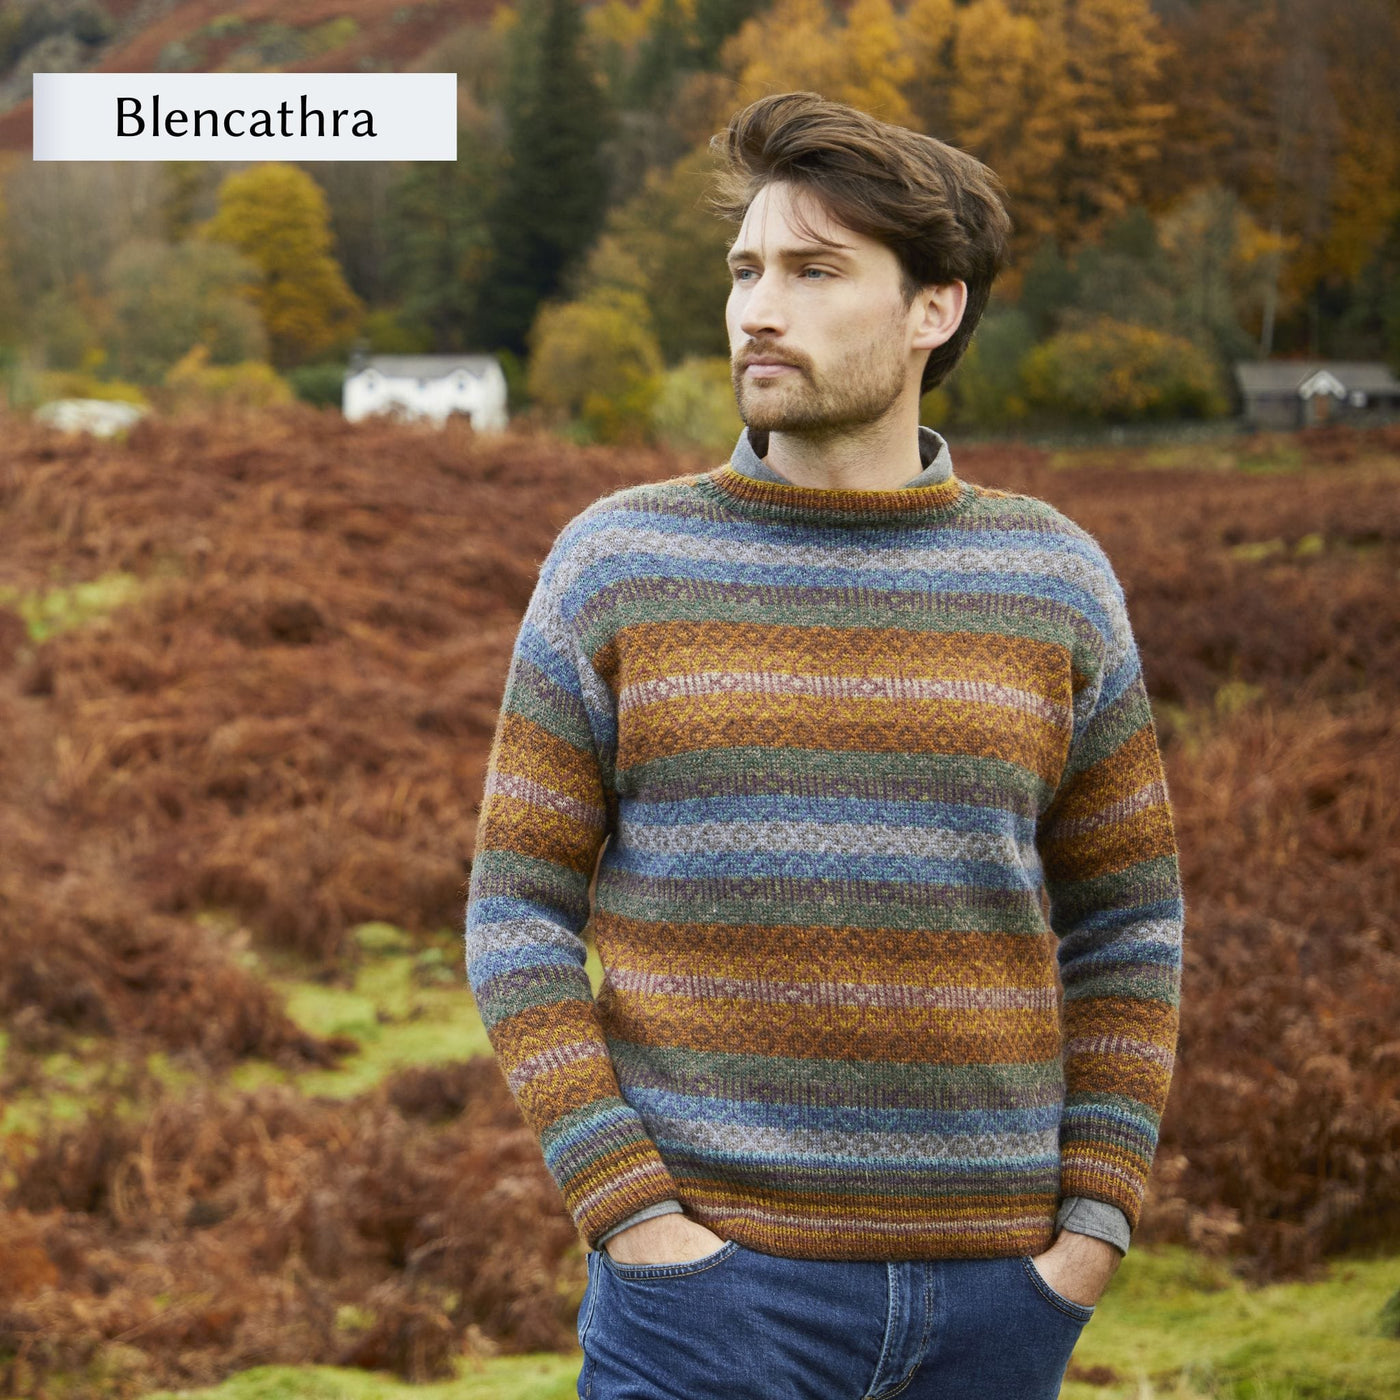 Male model wearing allover colorwork sweater design, Blencathra, from Westmorland book by Marie Wallin.